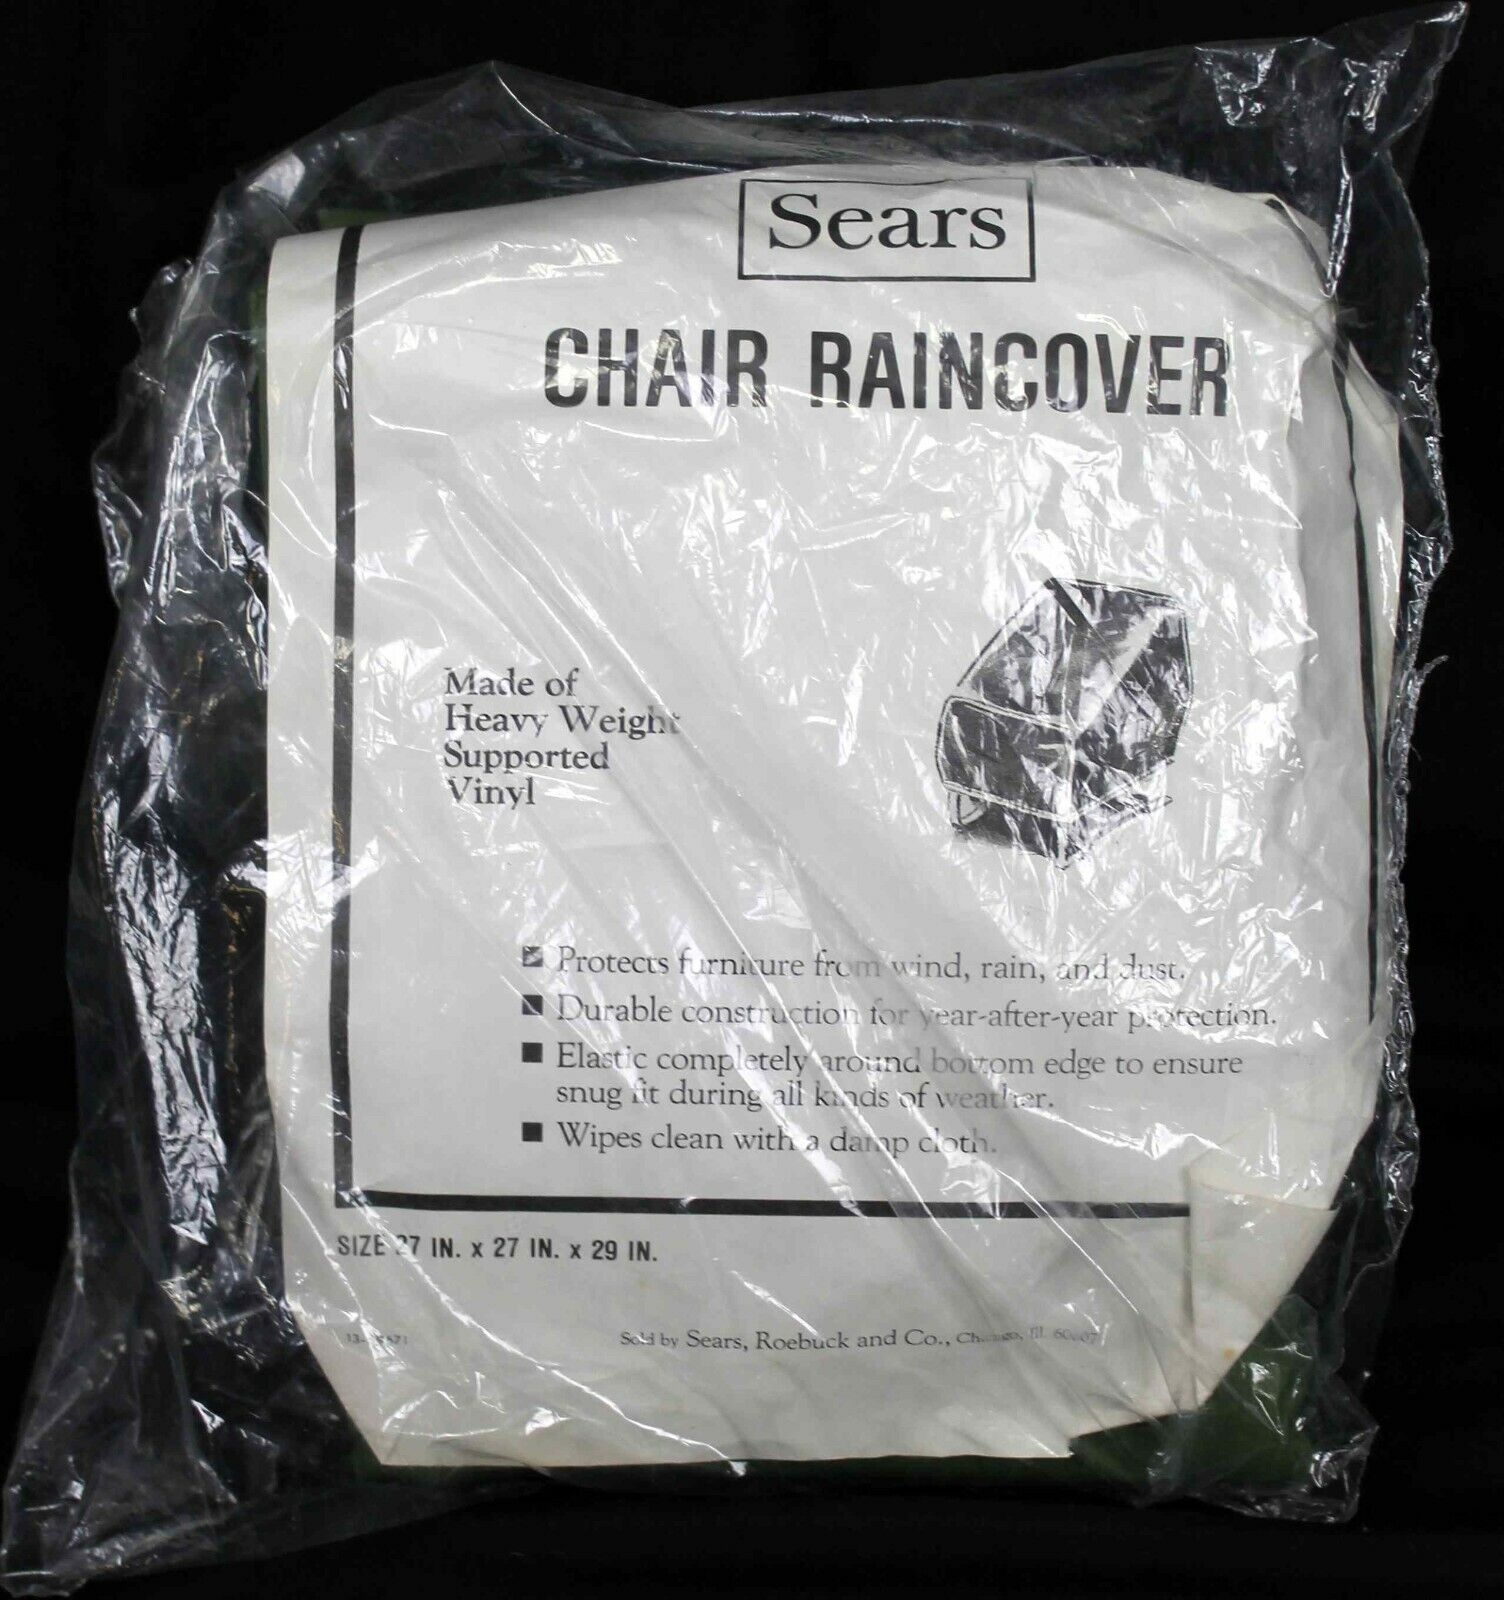 Vtg 1970s Sears Max Raleigh Mall 70% OFF Outdoor Chair He Table Cover Picnic Rain